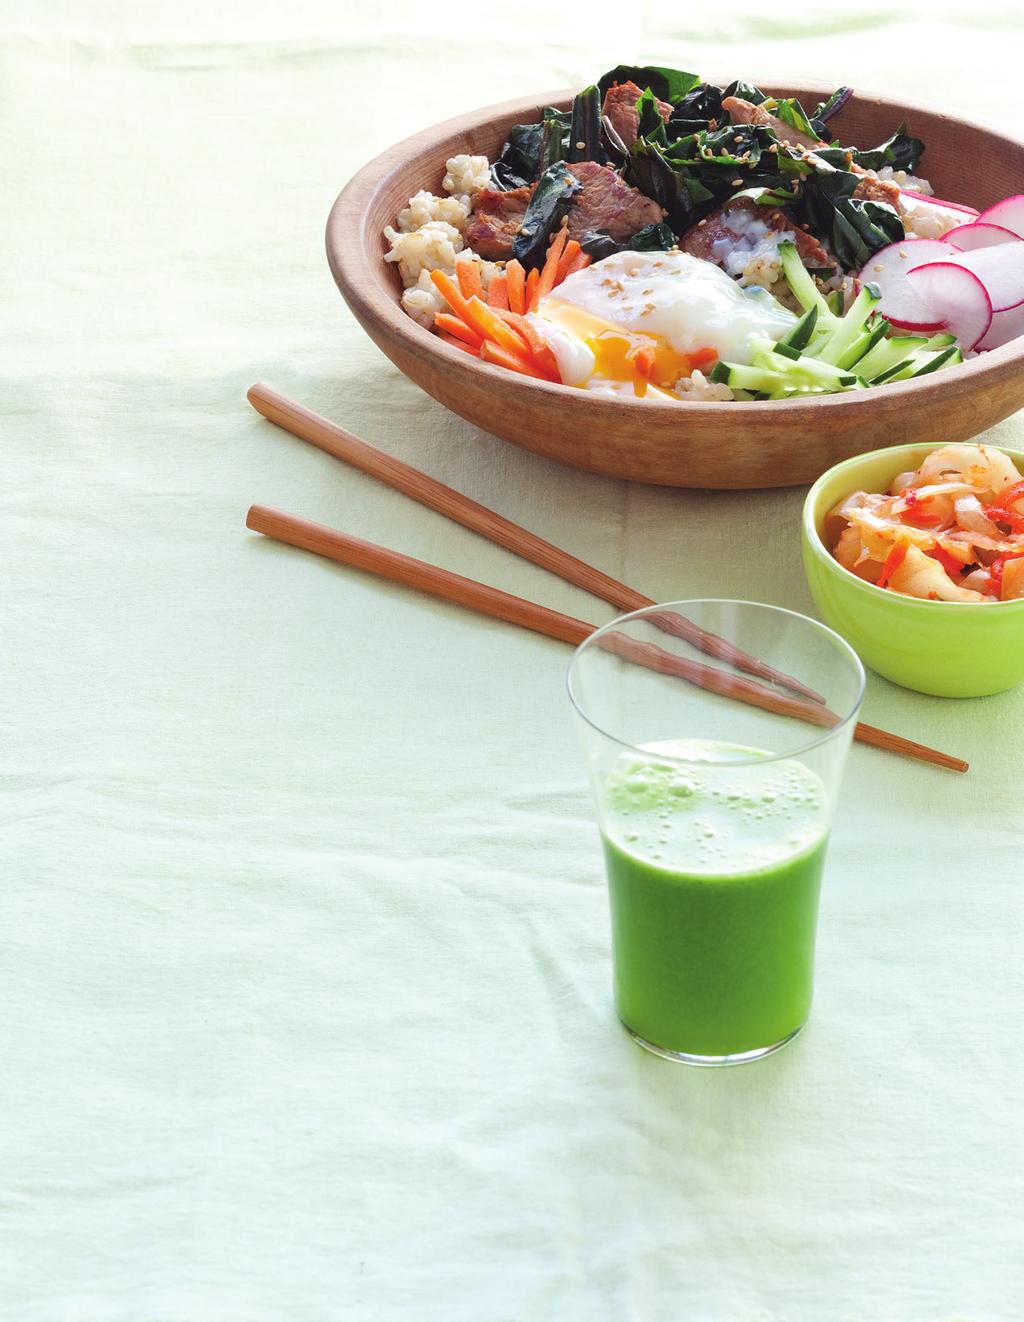 Spring Greens Korean Rice Bowl Greens are an essential part of any ricebowl dish.